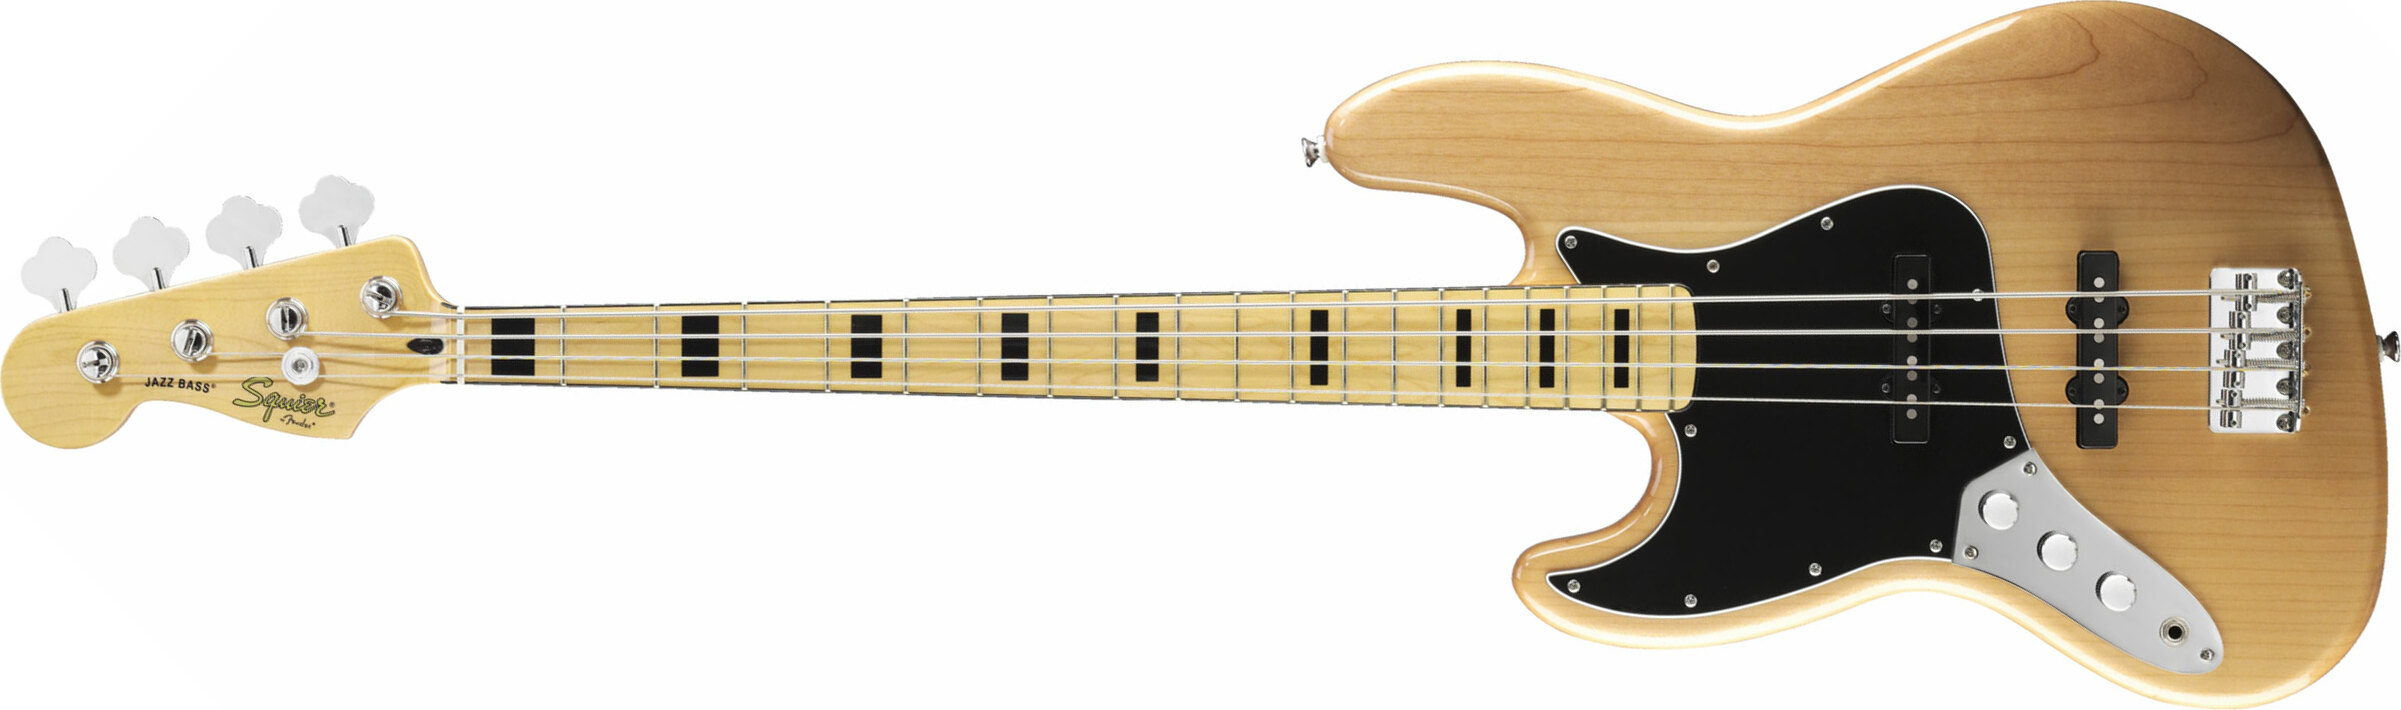 Squier Jazz Bass Vintage Modified 70 Gaucher 2013 Mn Naturel - Solid body electric bass - Main picture